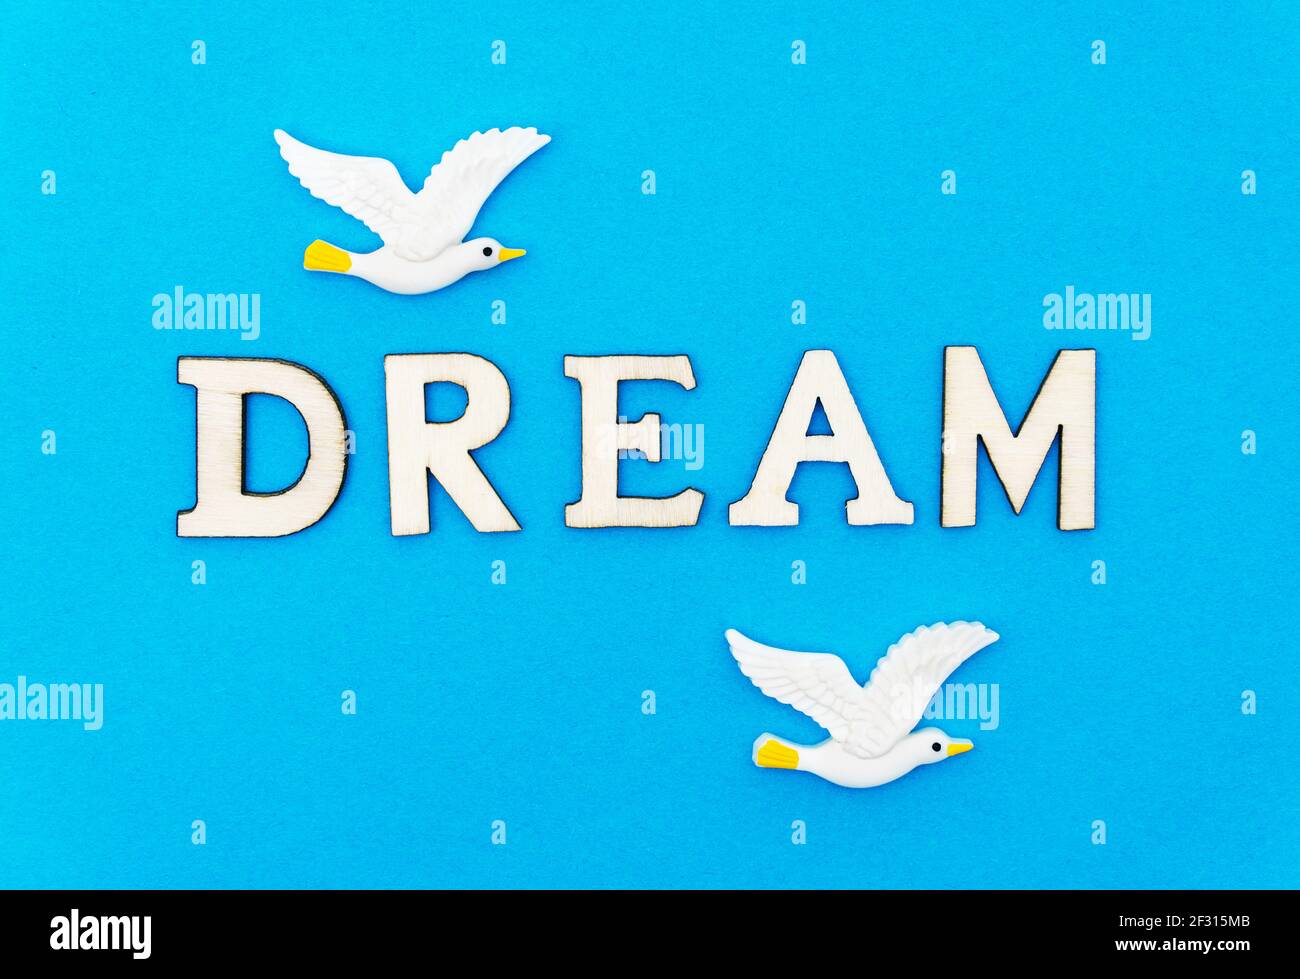 Word DREAM and two white plastic seagulls on blue background. Summer vacation dream concept. Stock Photo